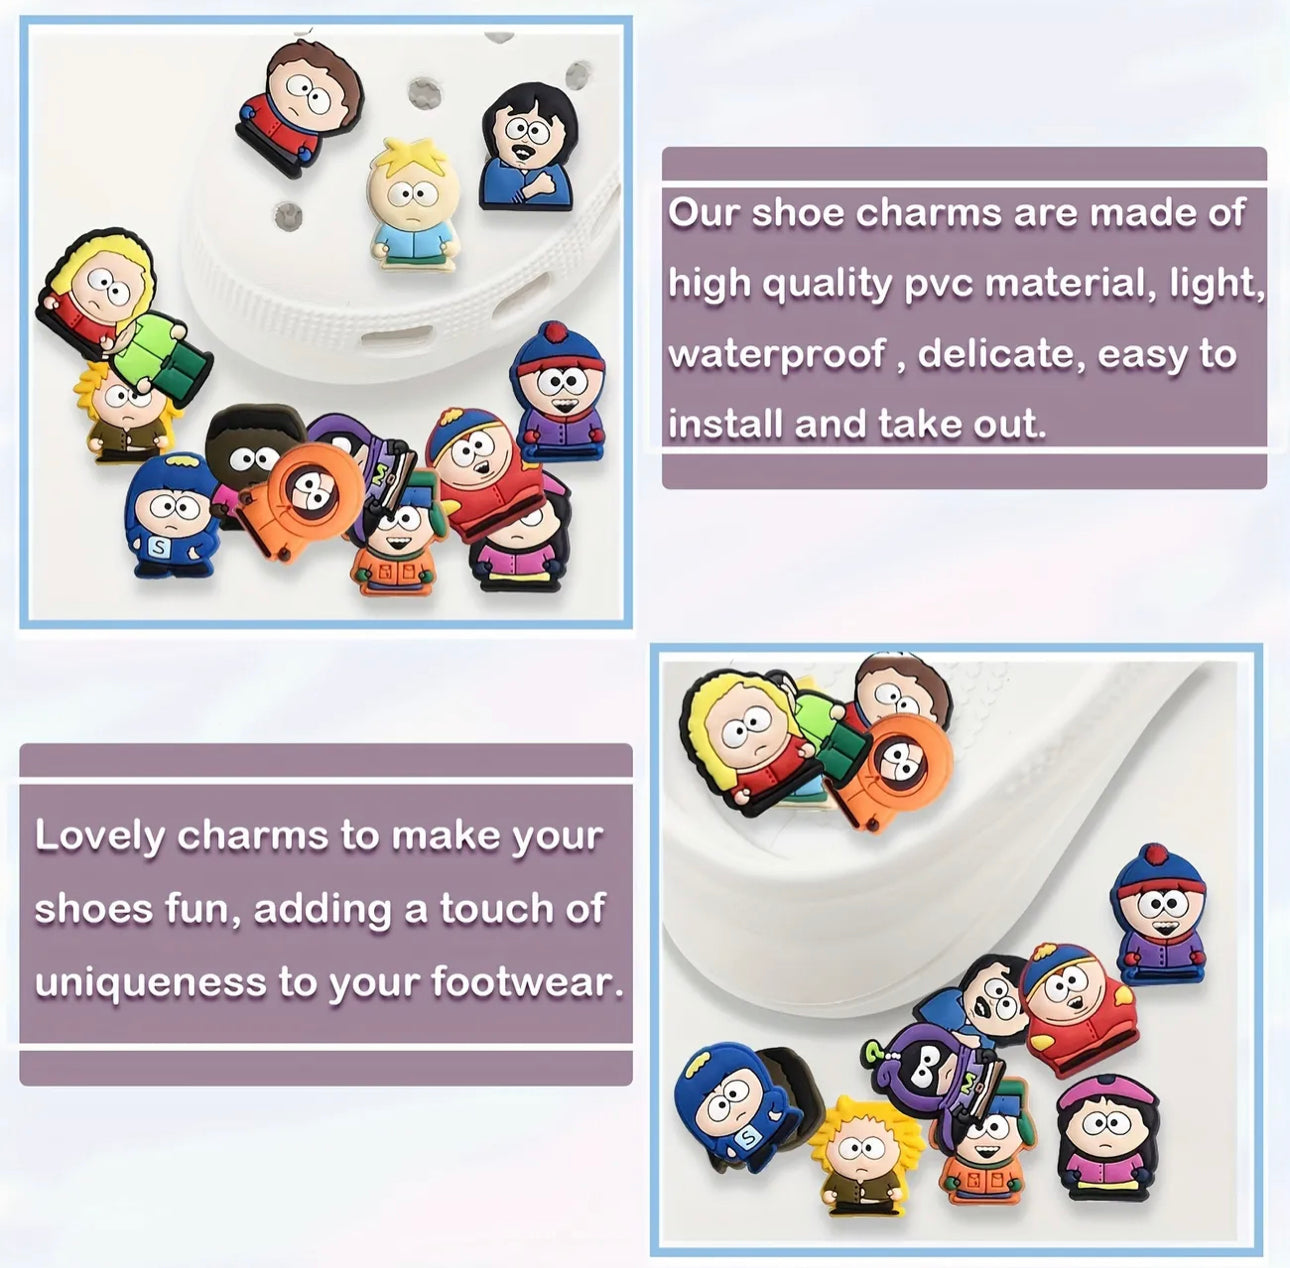 15pcs Cartoon Cute Shoe Charms For Crocs Sandals Unsex Shoe Decoration Party Birthday Gifts